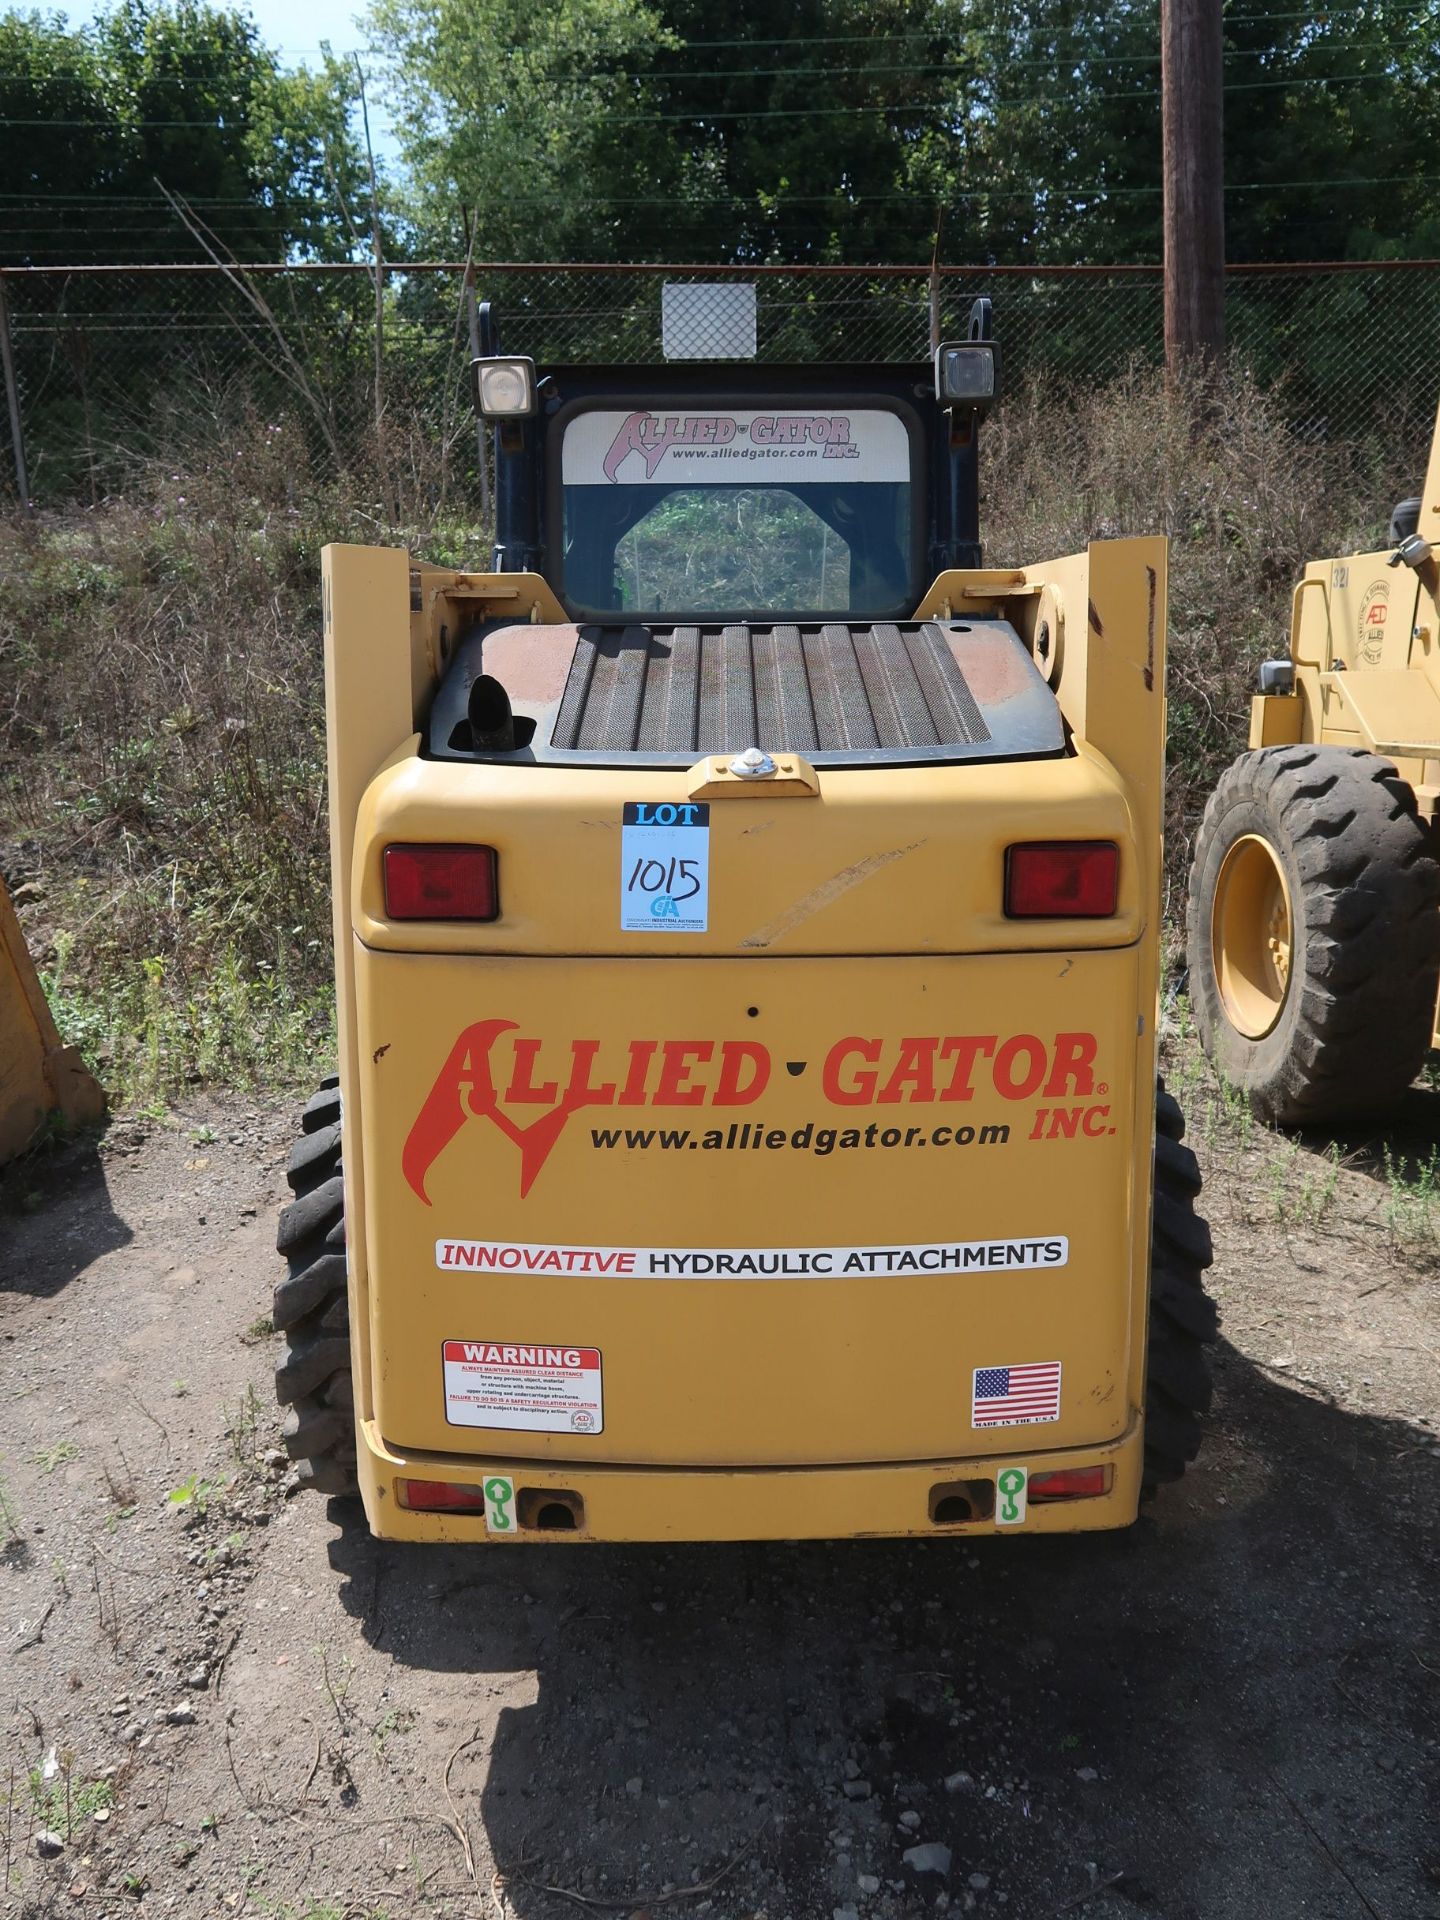 CATERPILLAR MODEL 248B TURBO SKID STEER LOADER; S/N 5CL01248, SOLID TIRE, A/C, FRONT HYDRAULIC (UNIT - Image 2 of 5